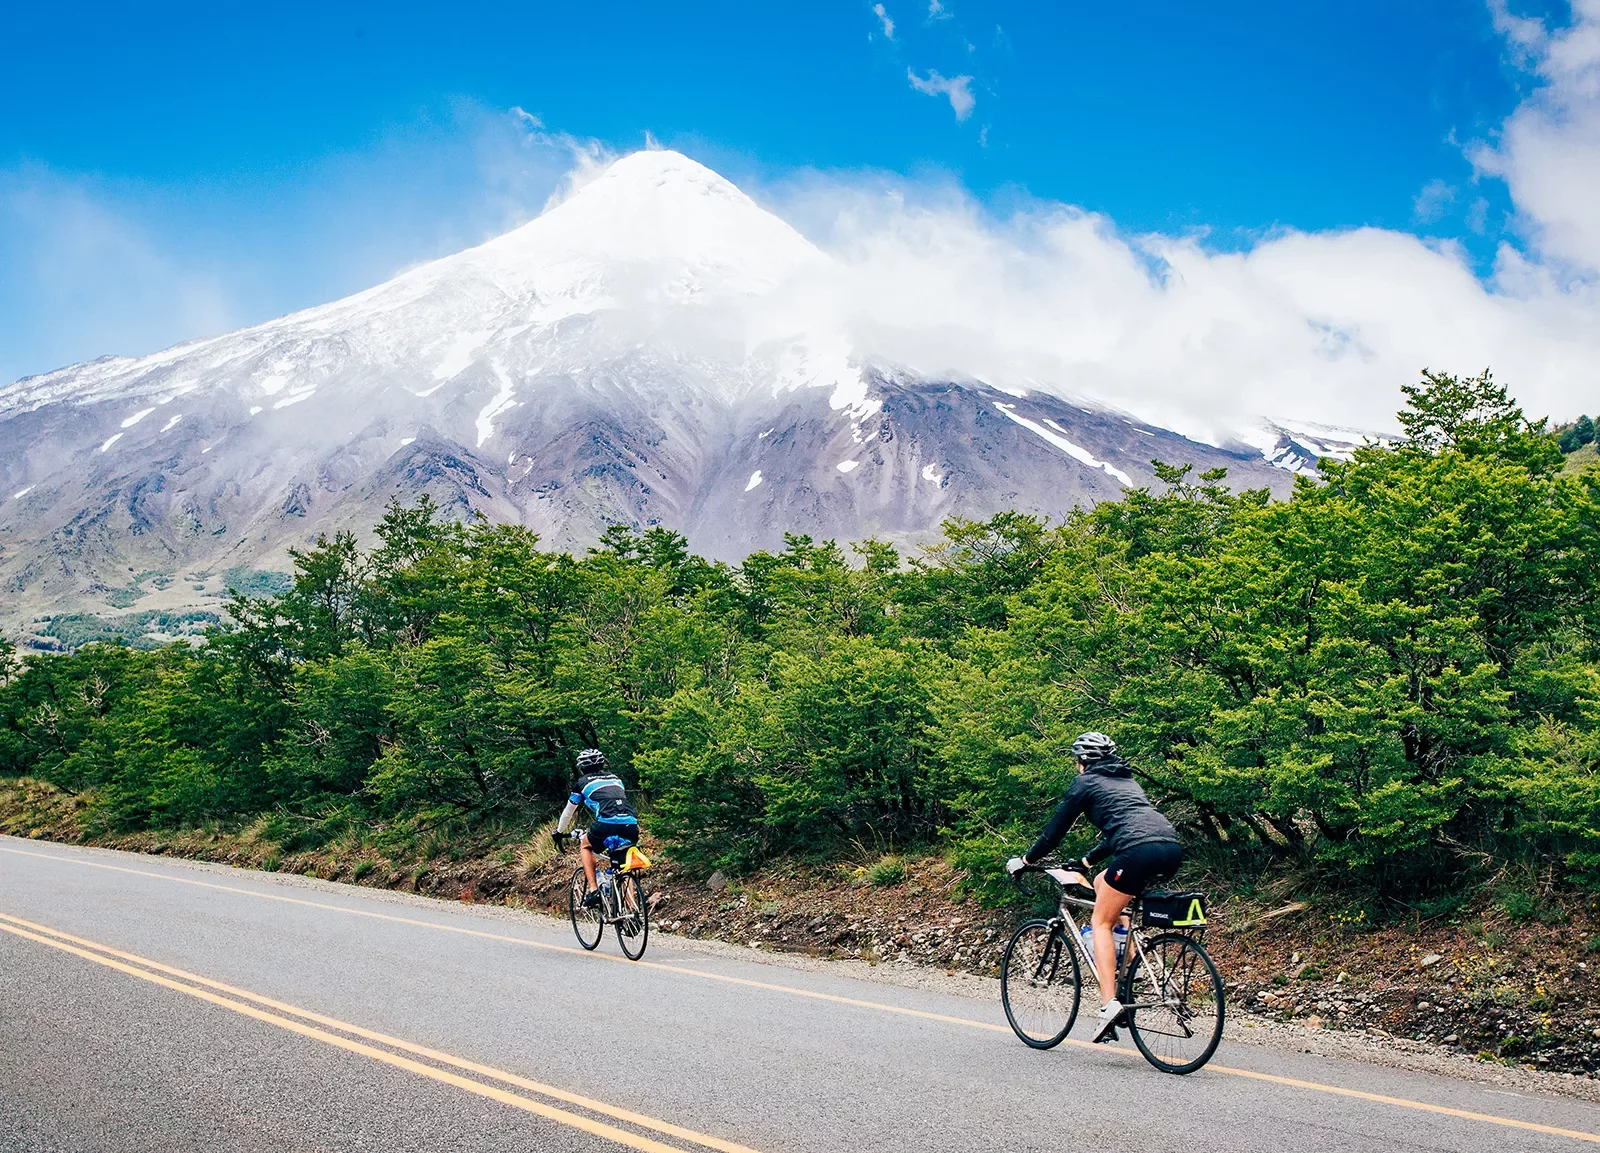 Two guests cycling up road, forest, snowy mountain in distance.